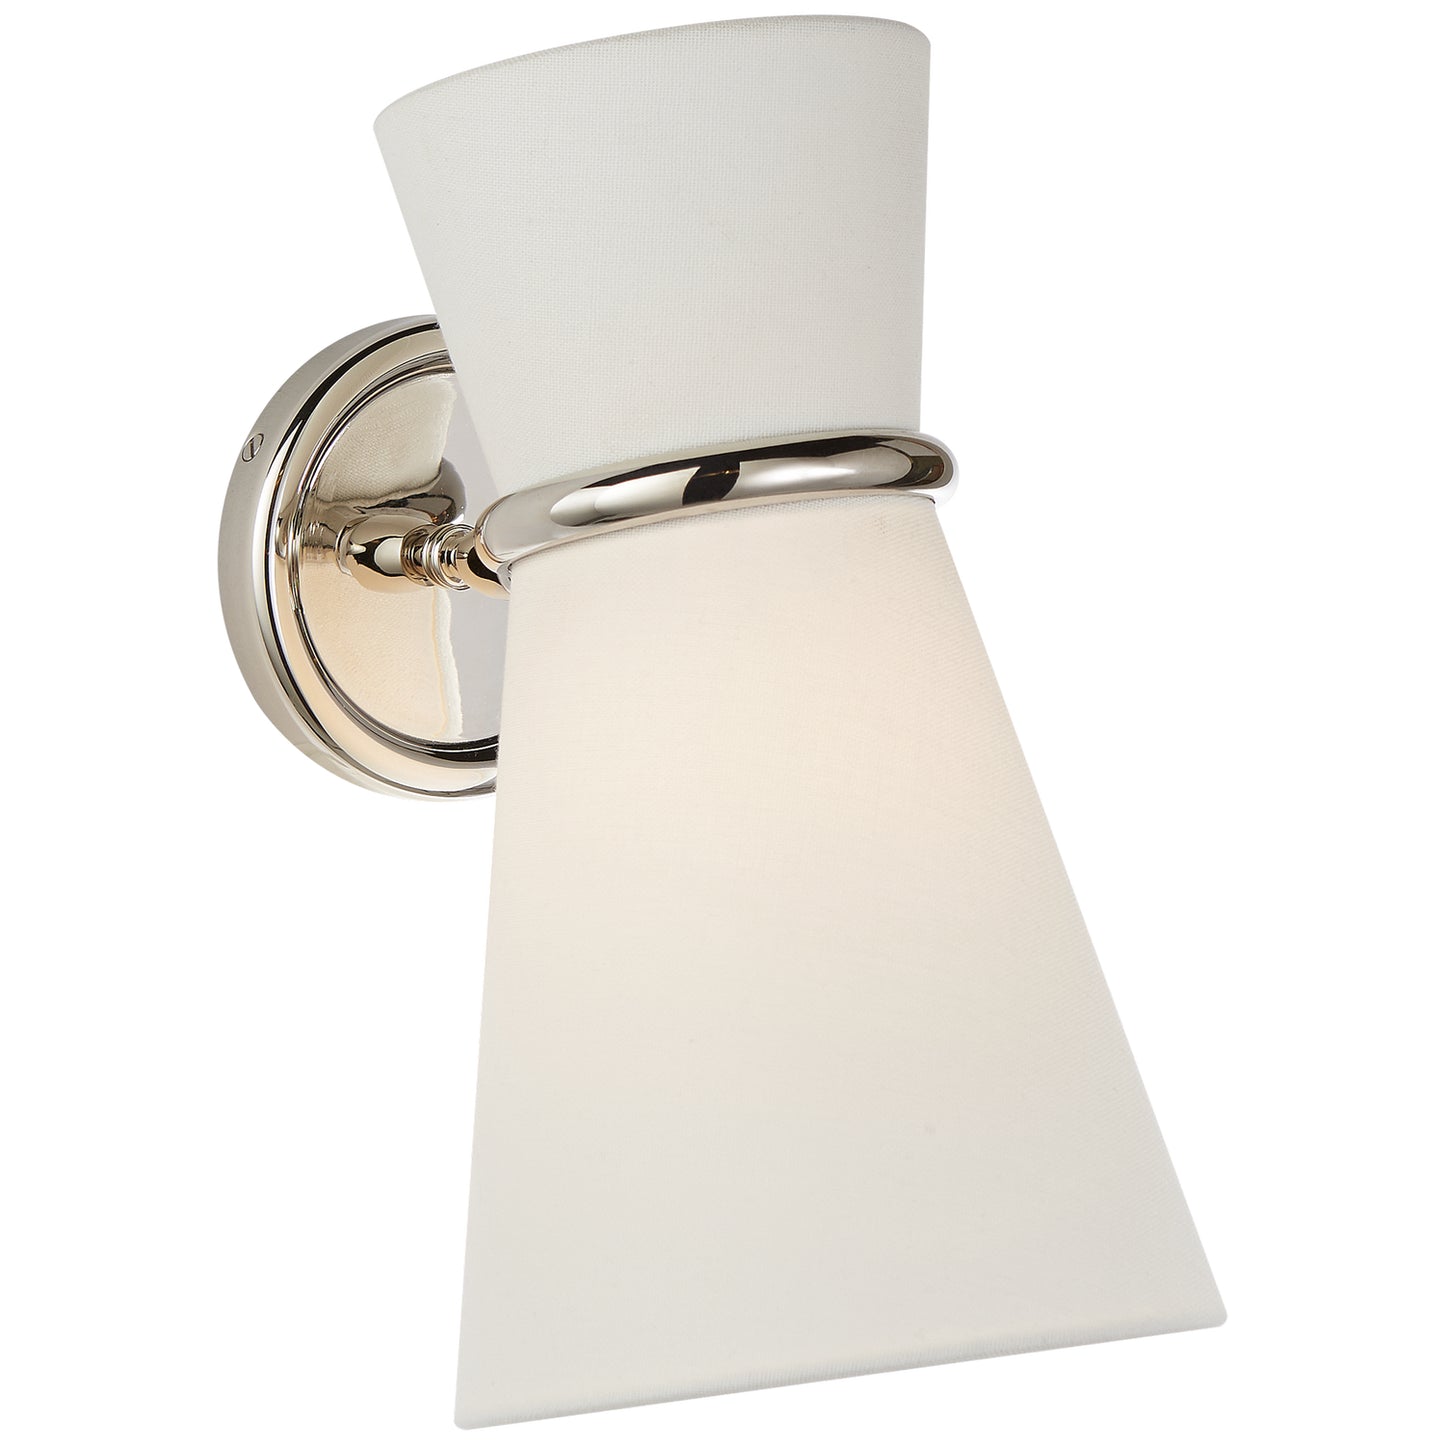 Visual Comfort Signature - ARN 2008PN-L - One Light Wall Sconce - Clarkson - Polished Nickel